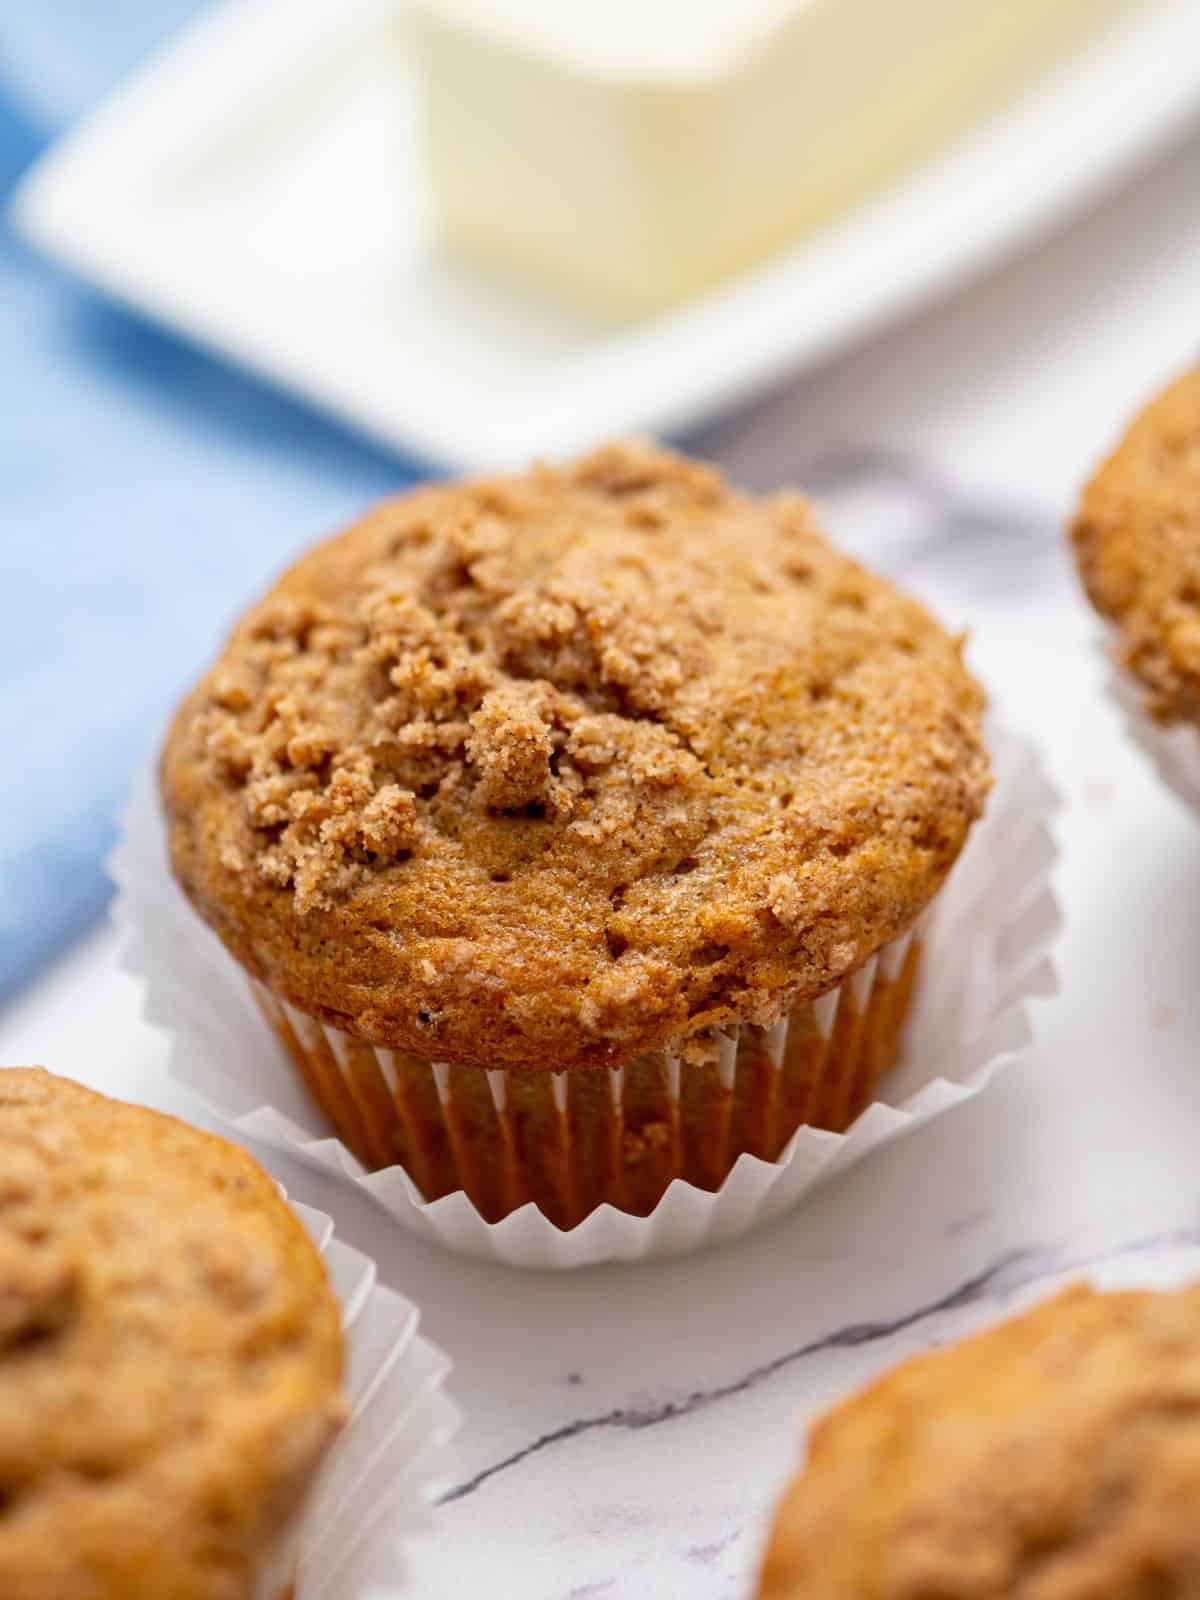 Baked gluten free muffins with streusel on white counter.